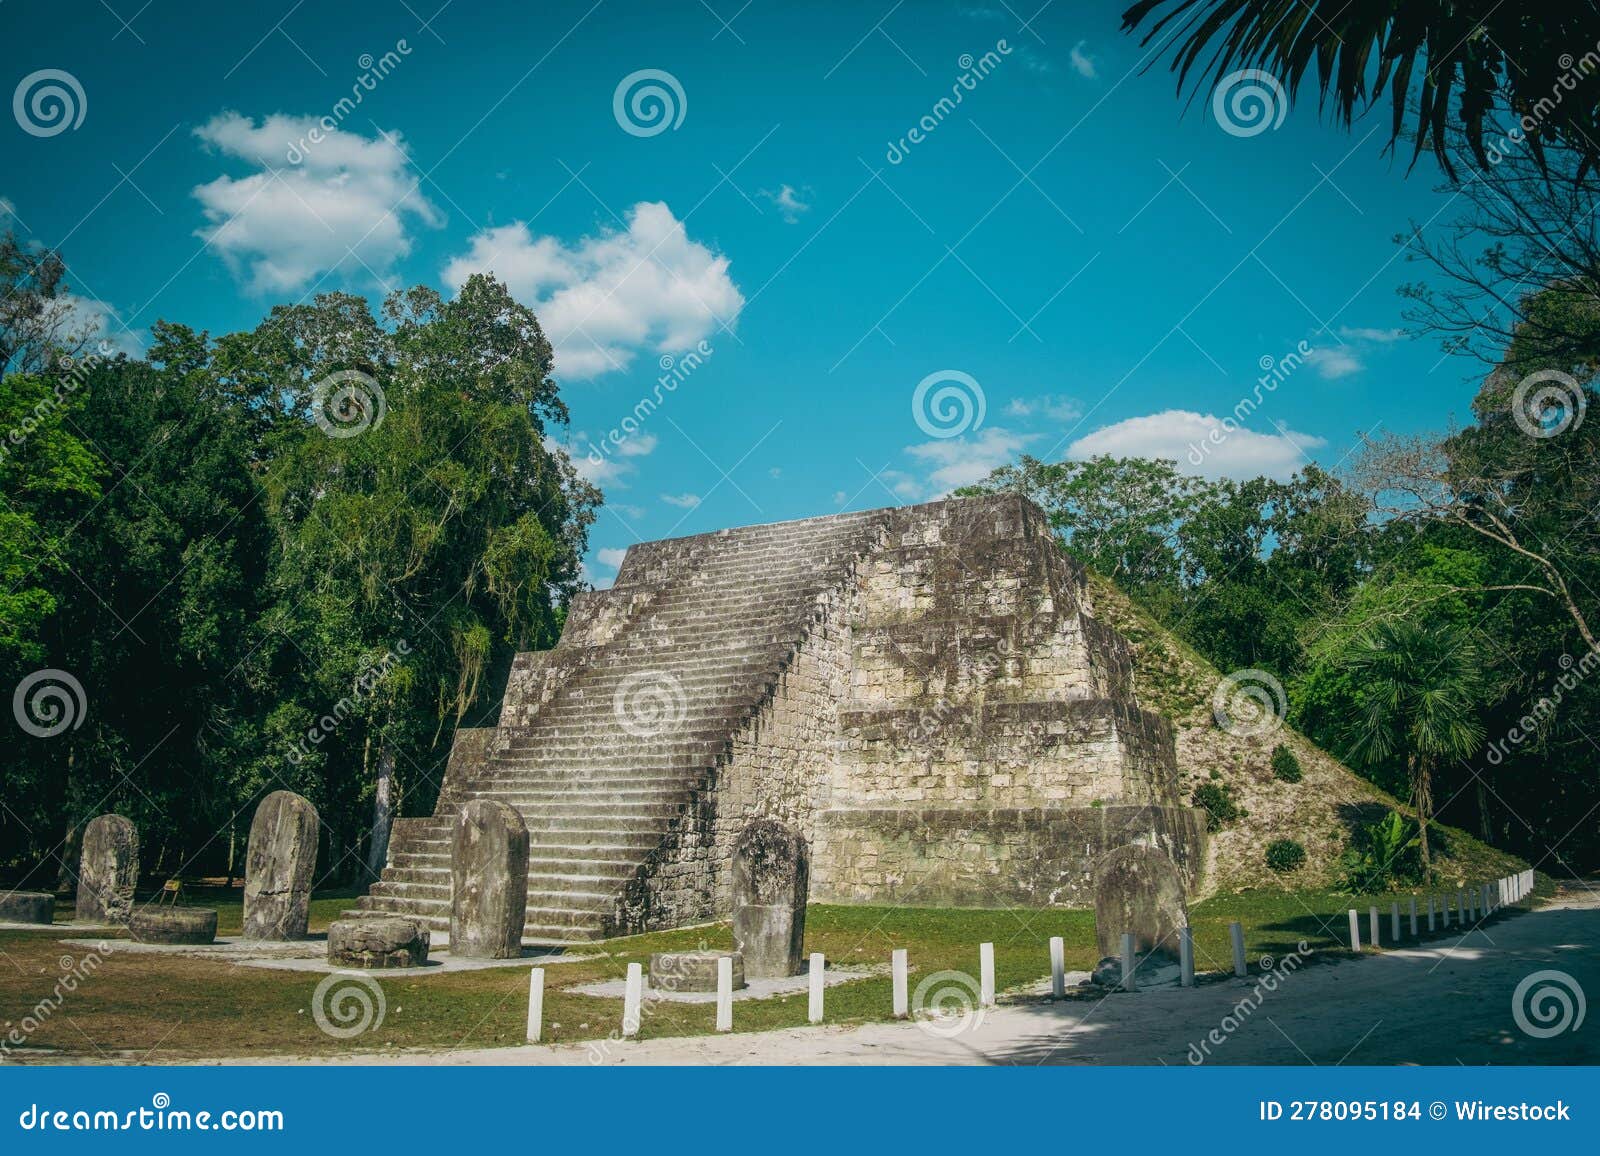 ancient ruins of complejo q, located in the ancient mayan city of tikal in guatemala